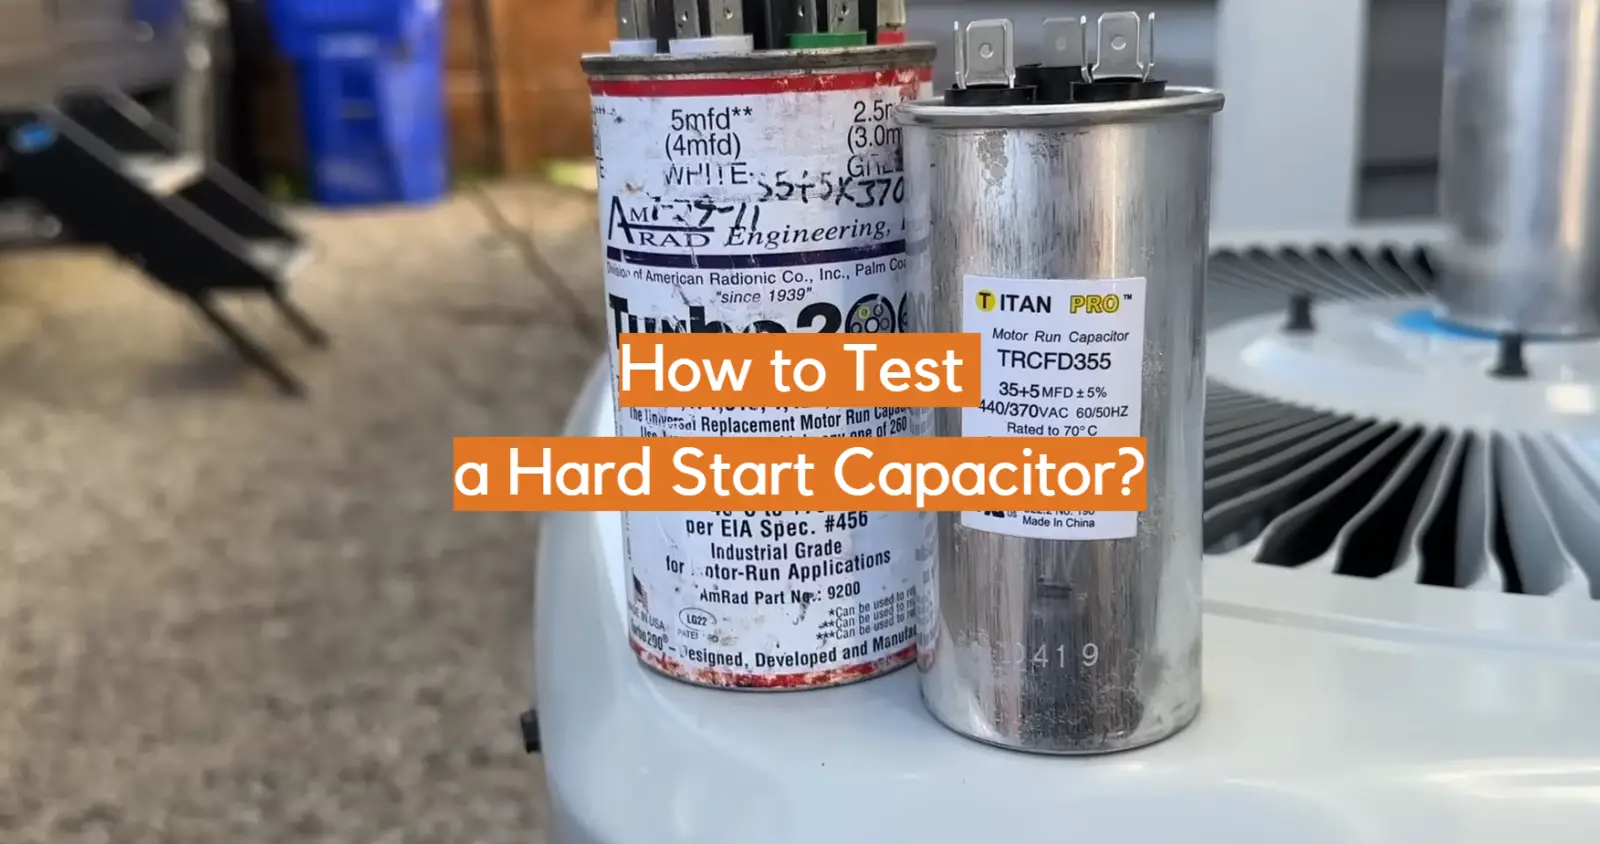 How to Test a Hard Start Capacitor?